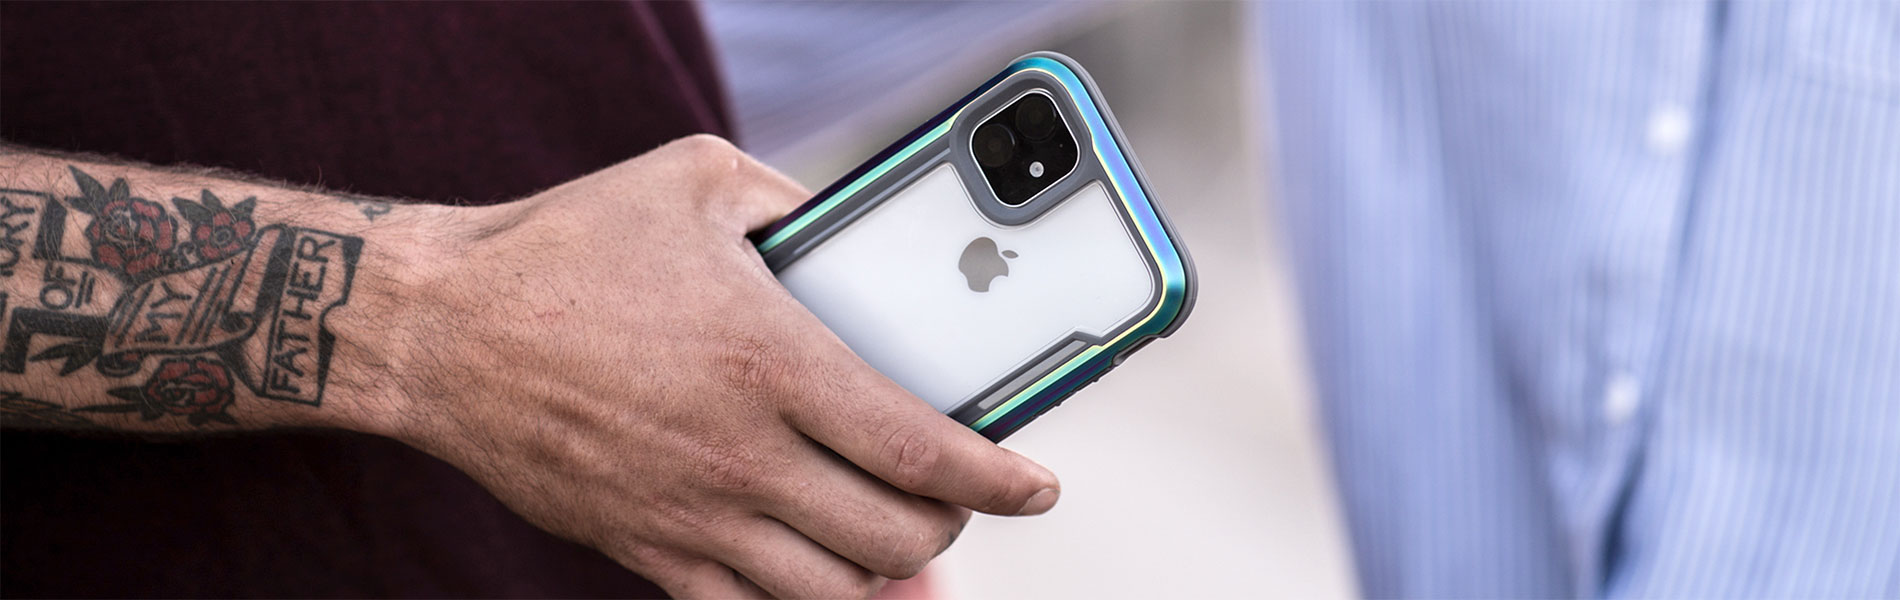 Get 20 Off Defense Cases For Iphone 11 11 Pro And 11 Pro Max For A Limited Time 9to5mac